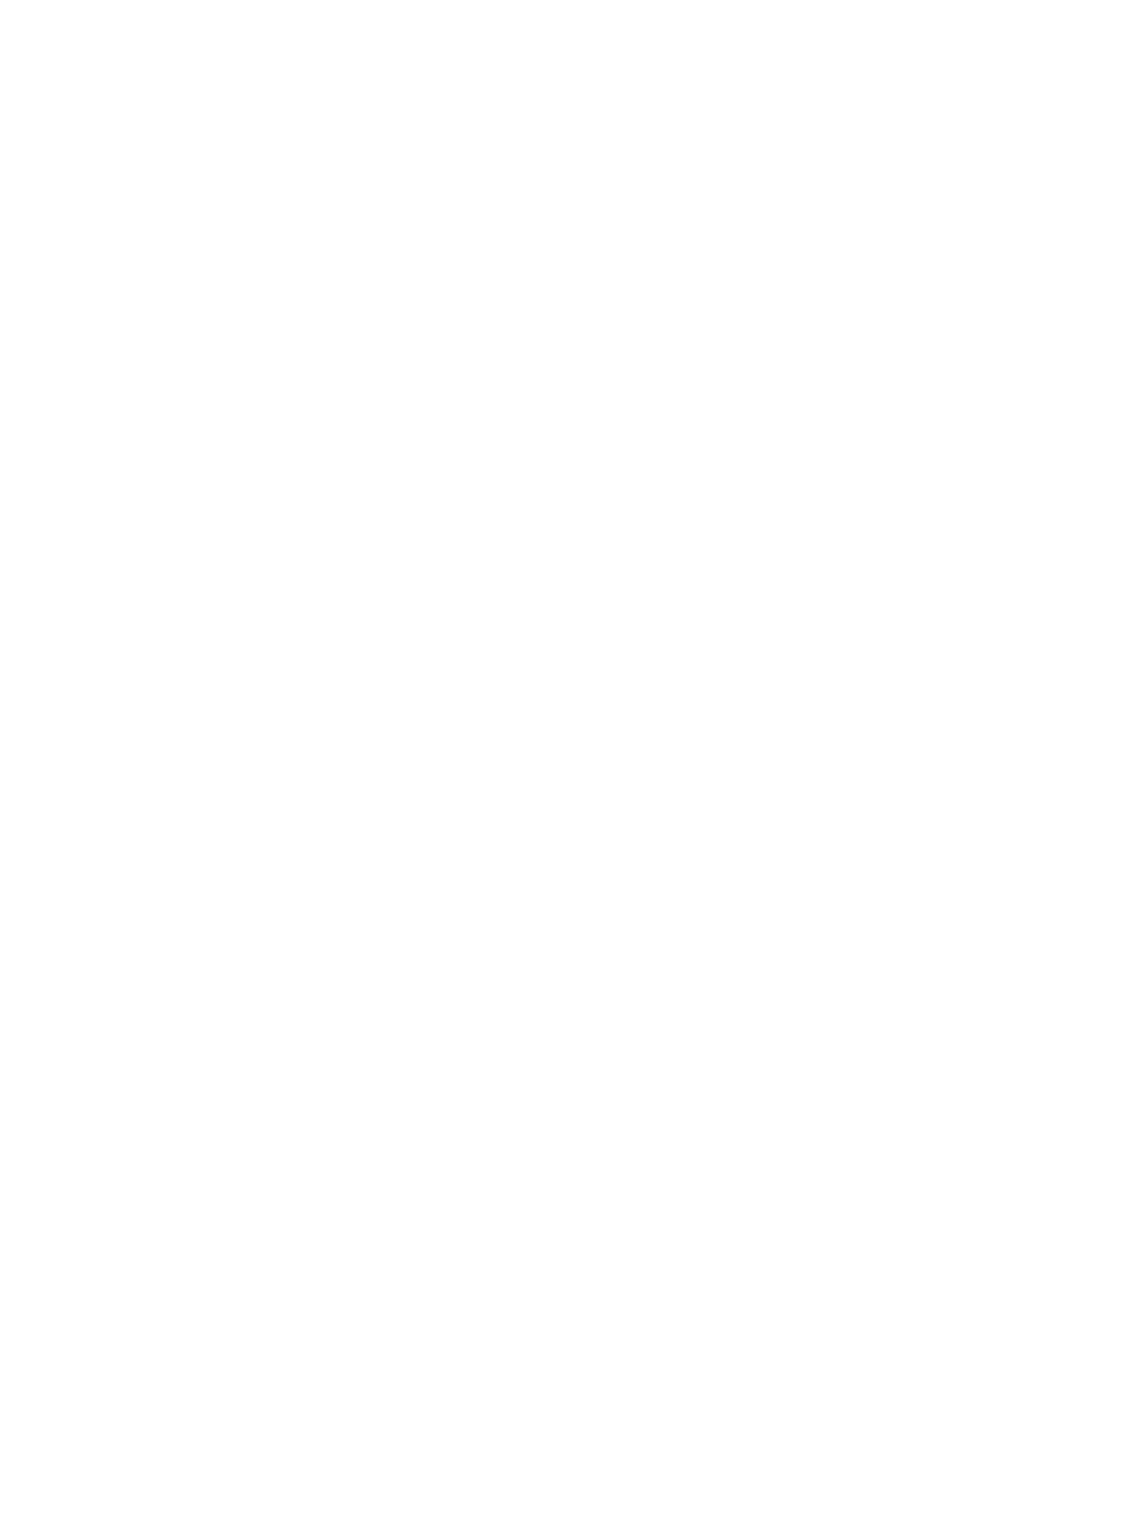 Ashmore Group logo for dark backgrounds (transparent PNG)